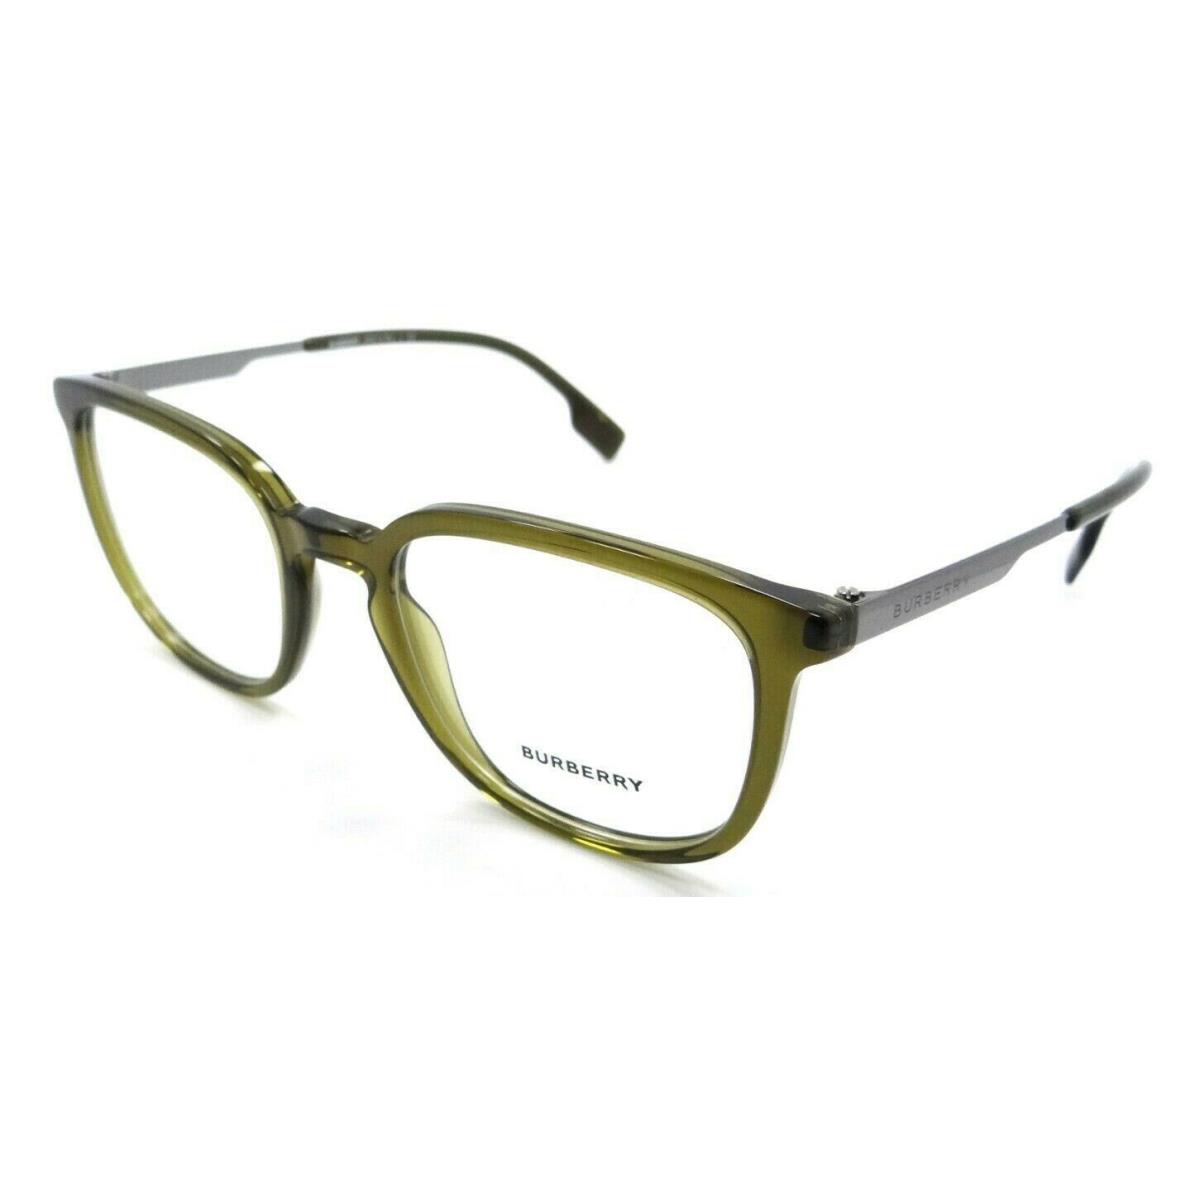 Burberry Eyeglasses Frames BE 2307 3356 52-20-145 Olive Green Made in Italy